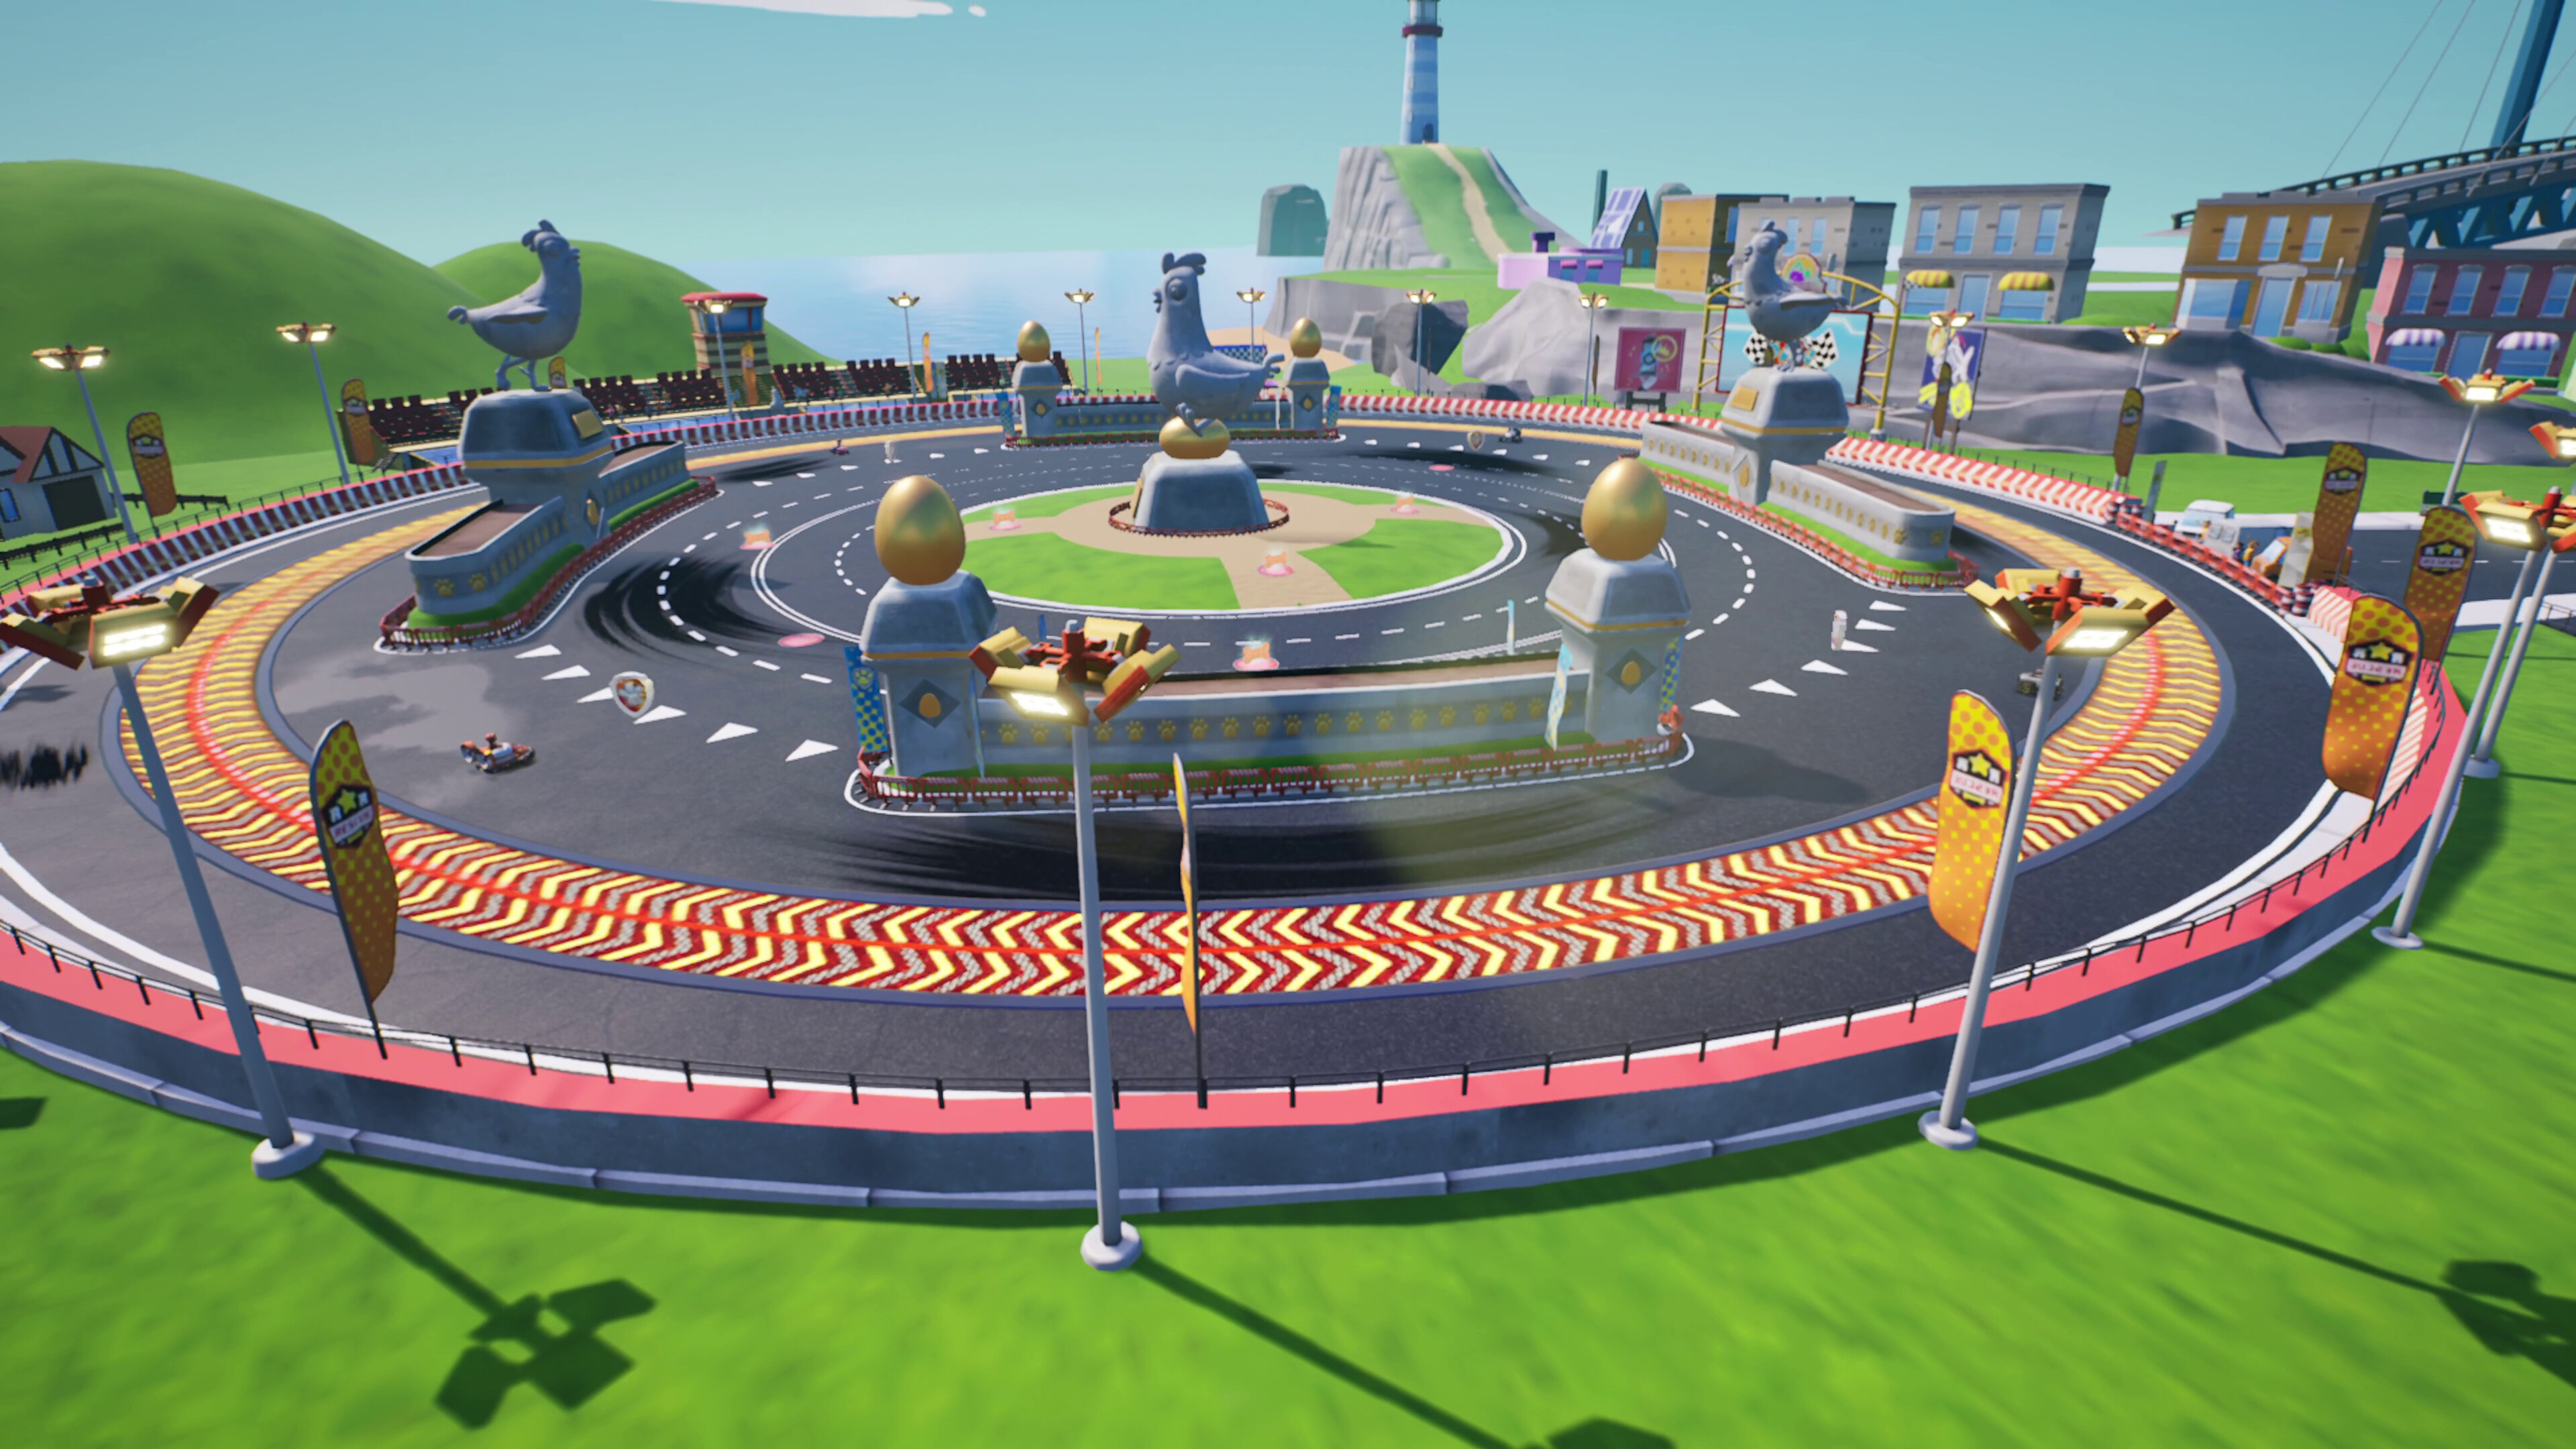 PAW Patrol: Grand Prix - Pup Treat Arena Free Download for PC